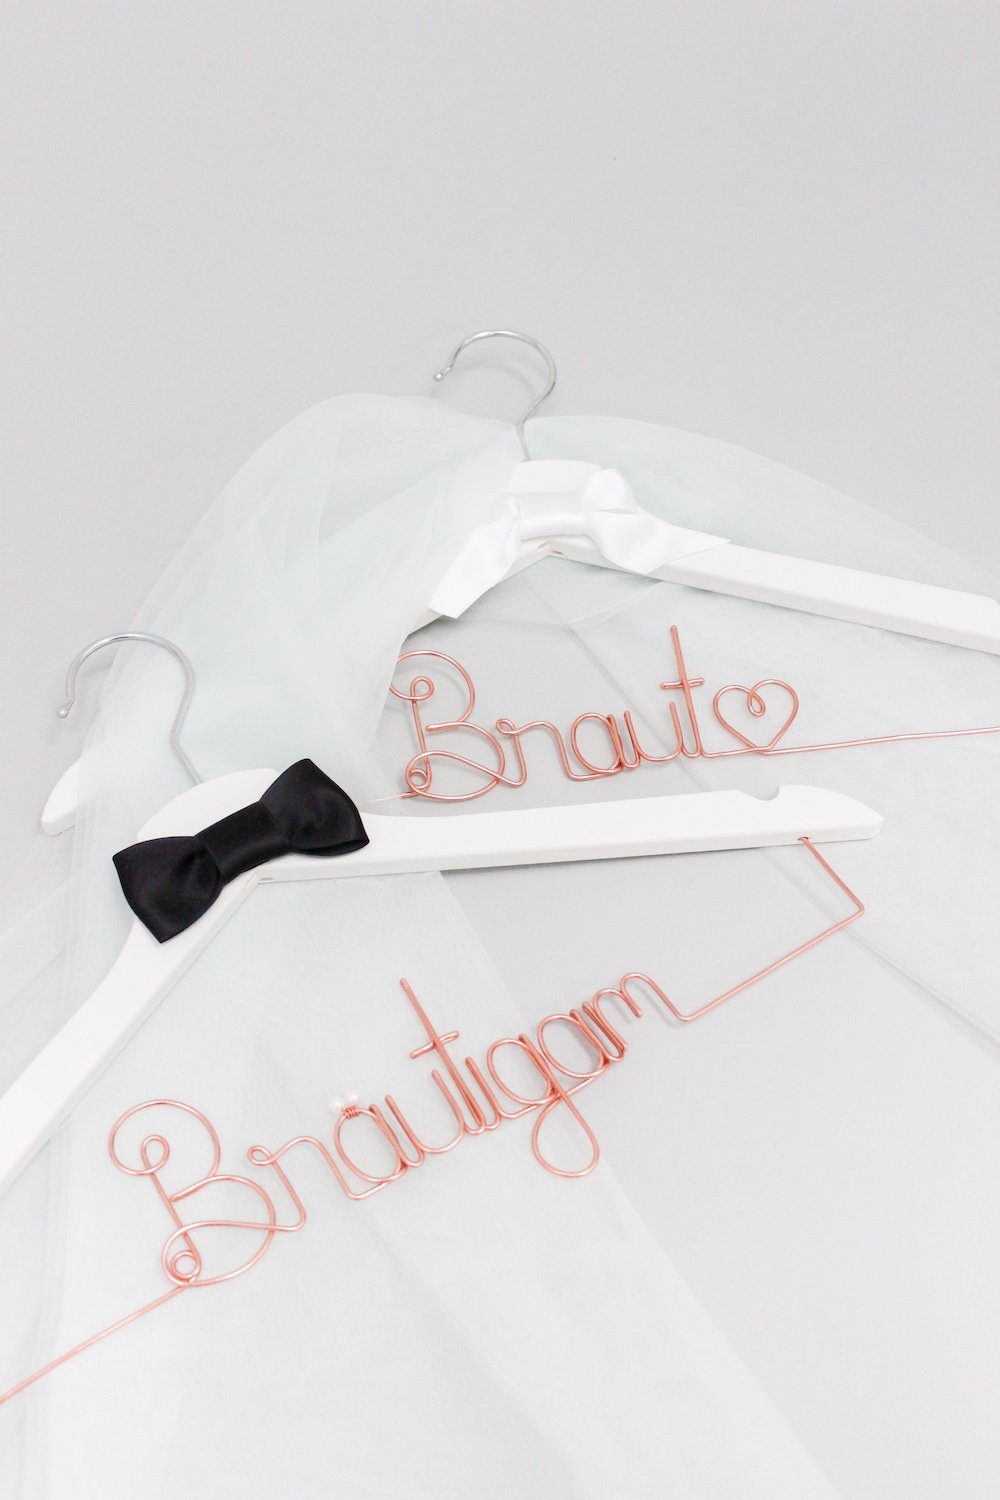 Coat hanger, wire hanger for groom in white with rose gold or gold – noni